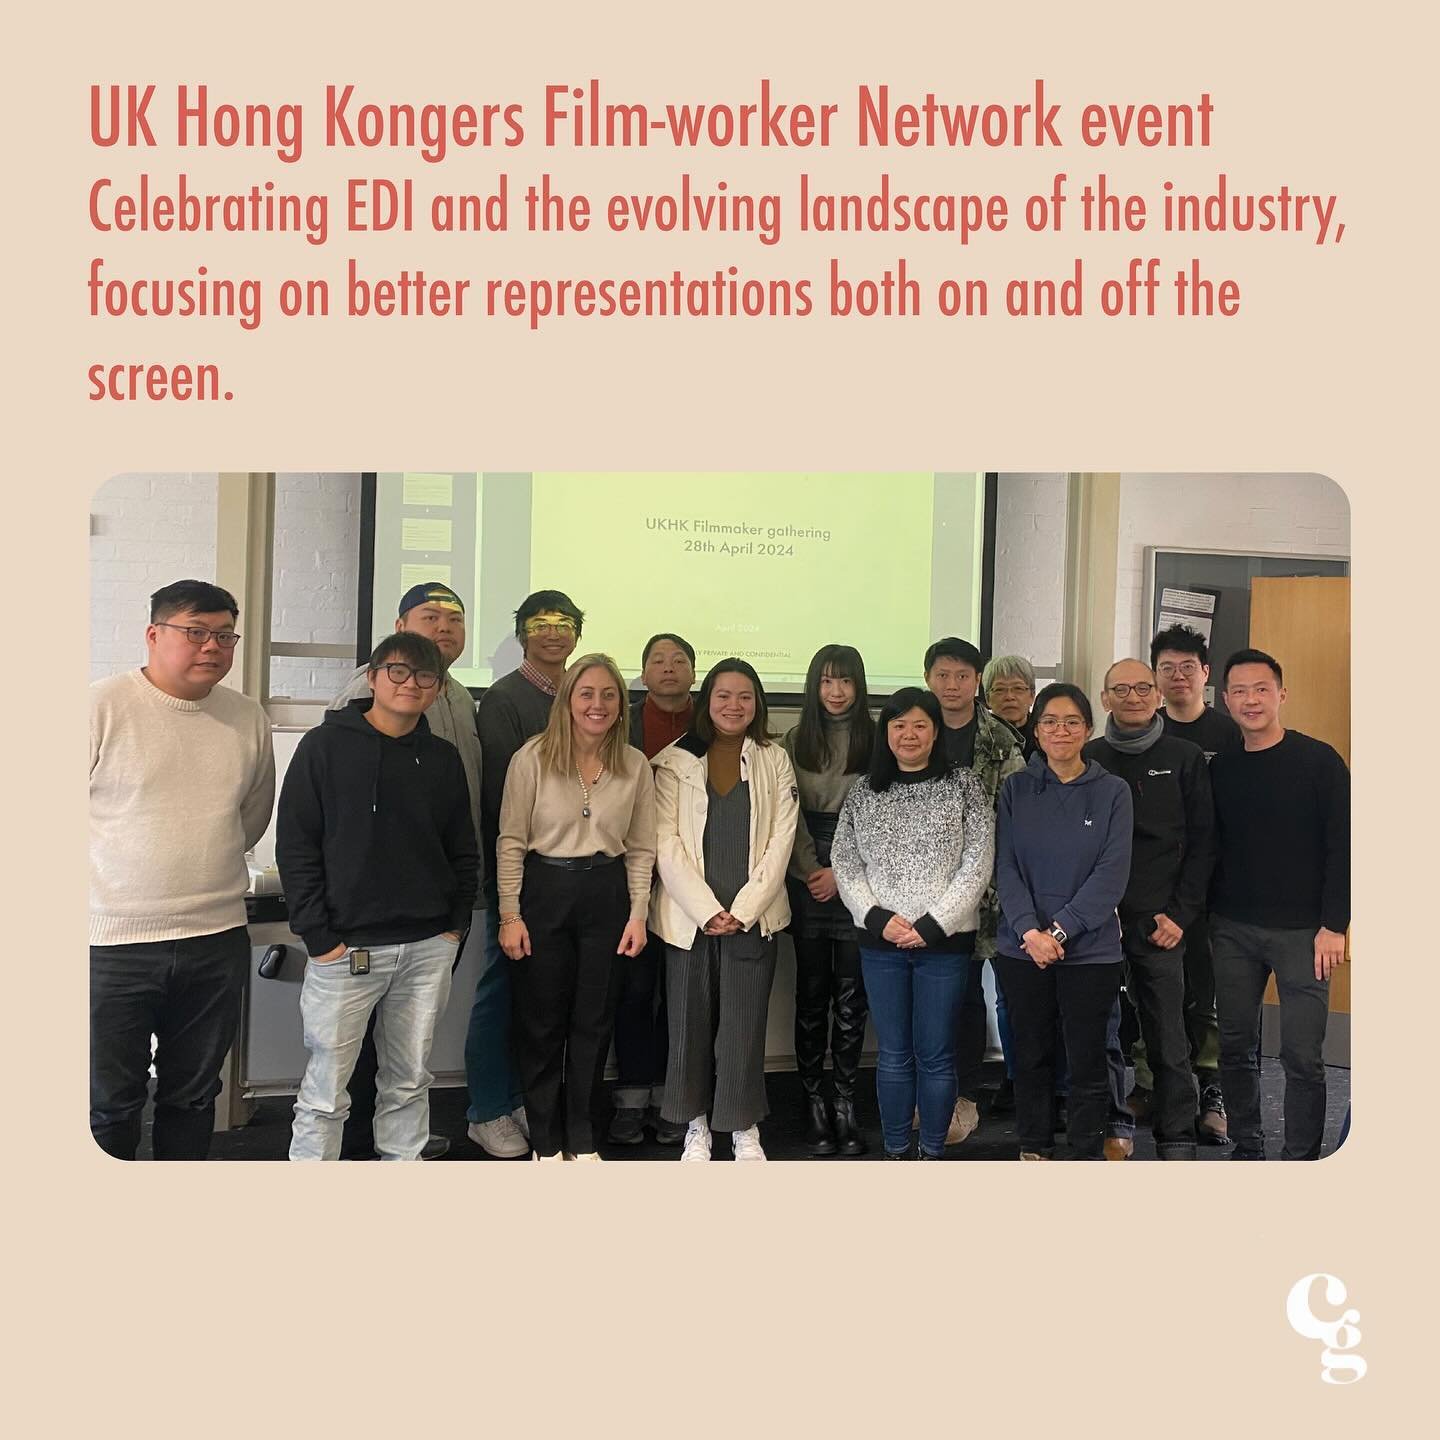 It was an absolute pleasure sharing my @cinegirlmag journey with the UK Hong Kongers Film-worker Network, hosted by @kithunghk at @goldsmithsuol , University of London. We delved into discussions about EDI and the evolving landscape of the industry, 